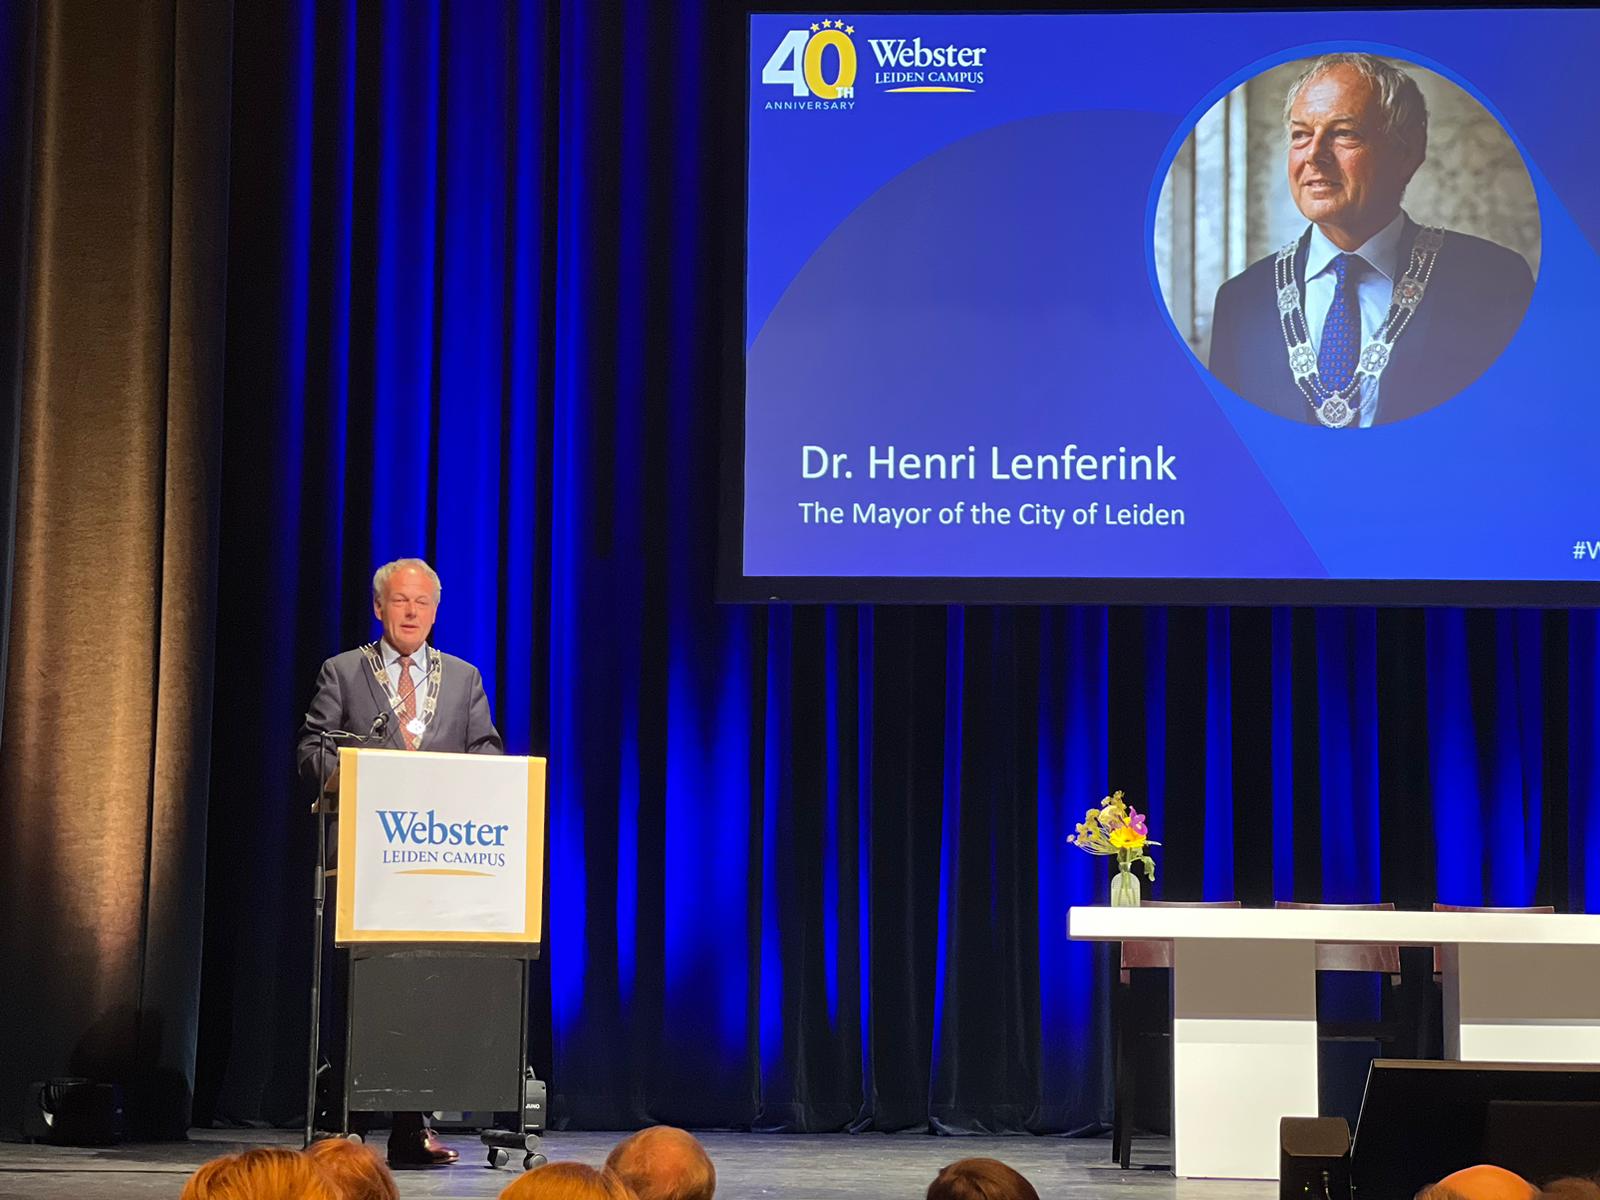 The mayor of the city of Leiden, Henri Lenferink, gives a welcome address to begin the celebration commemorating the 40th anniversary of Webster Leiden’s campus. 